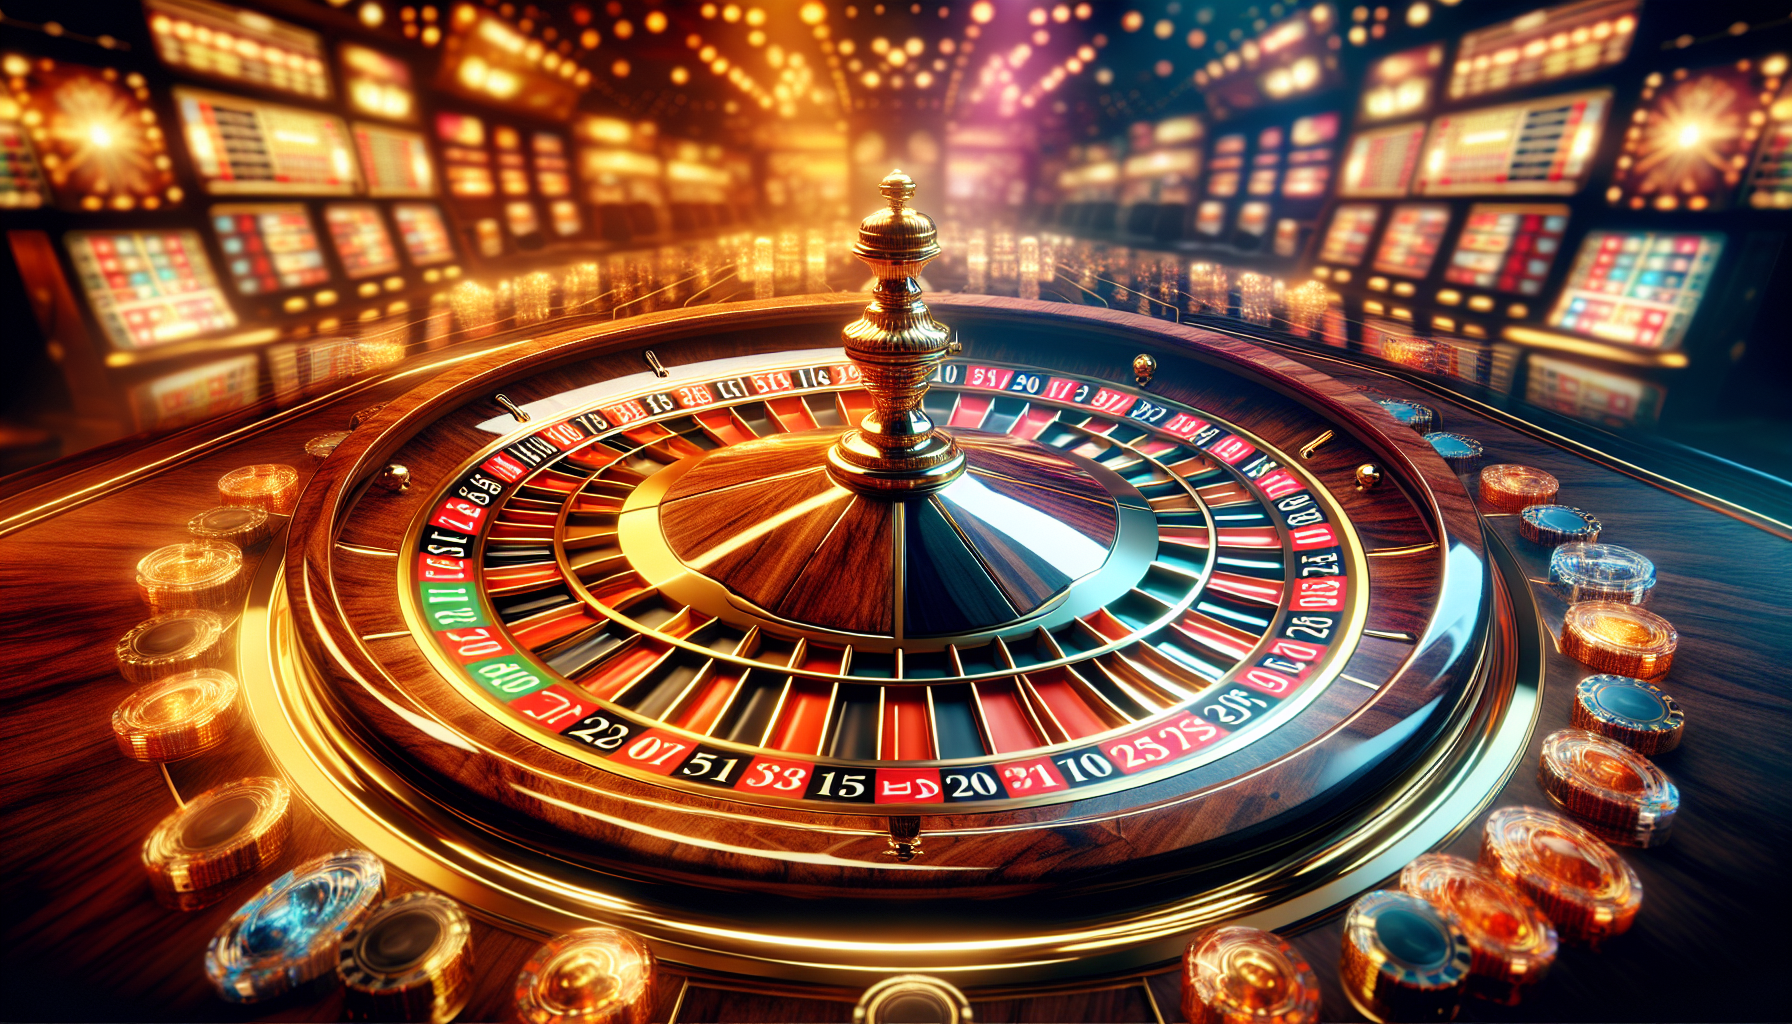 Illustration of a roulette wheel in an online casino